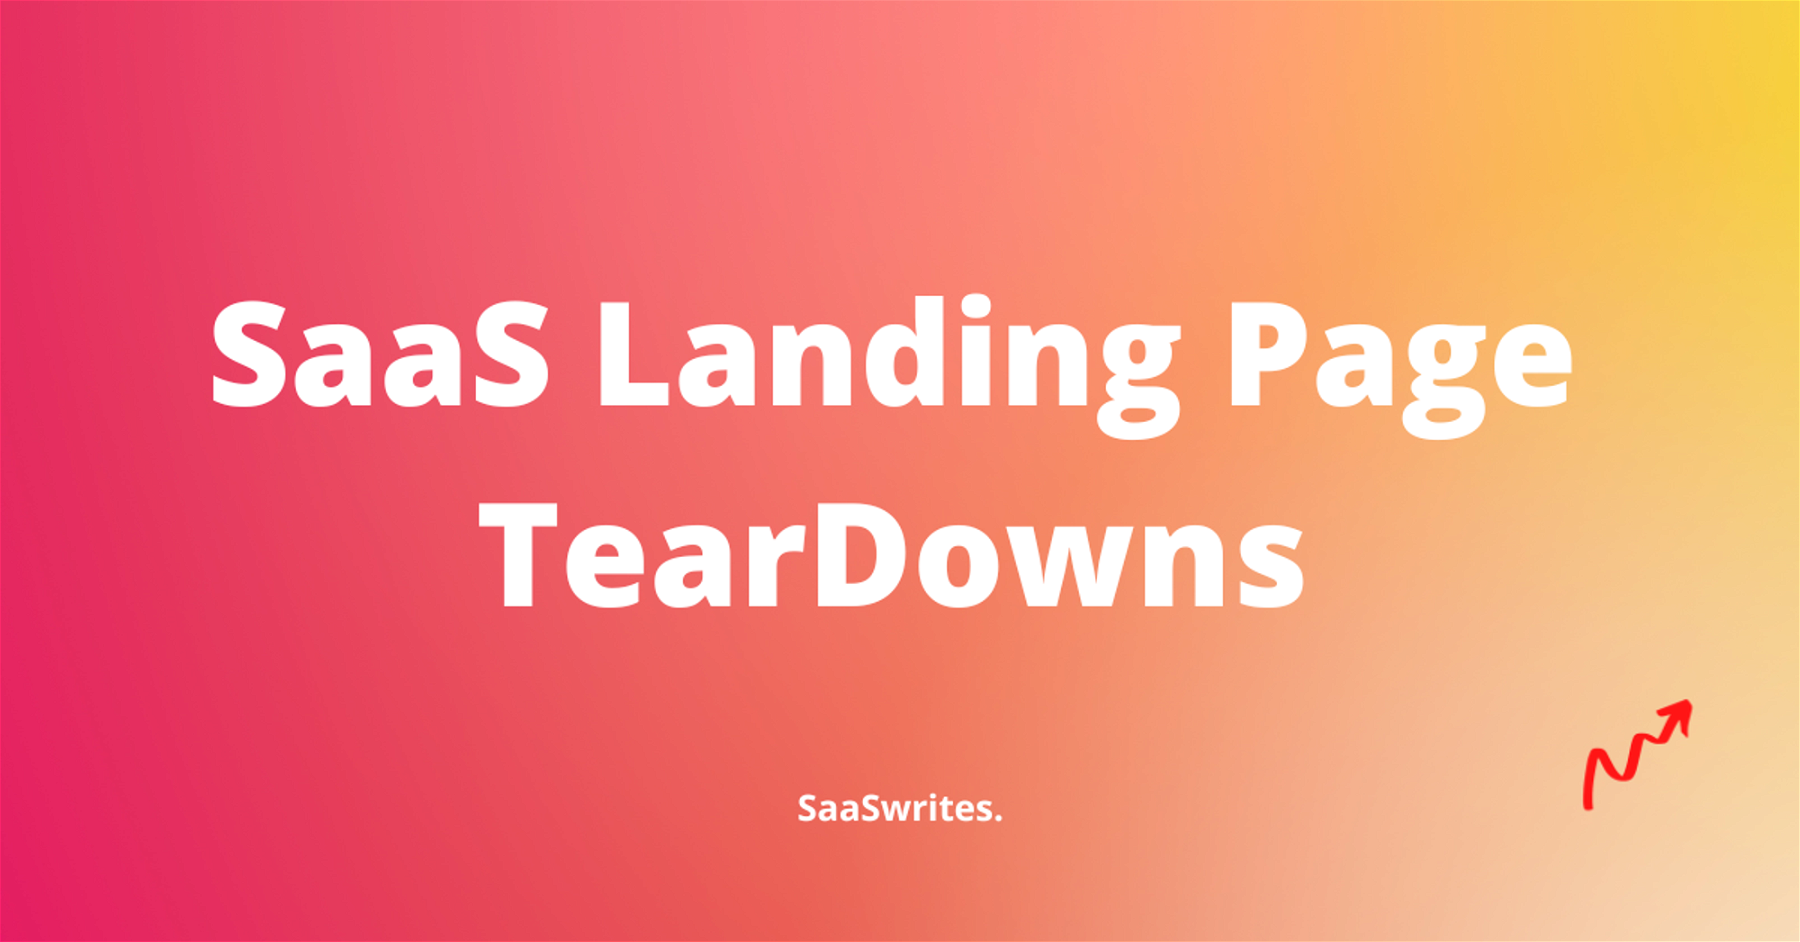 33 SaaS Landing Page Teardowns to Help Explode your Conversions!